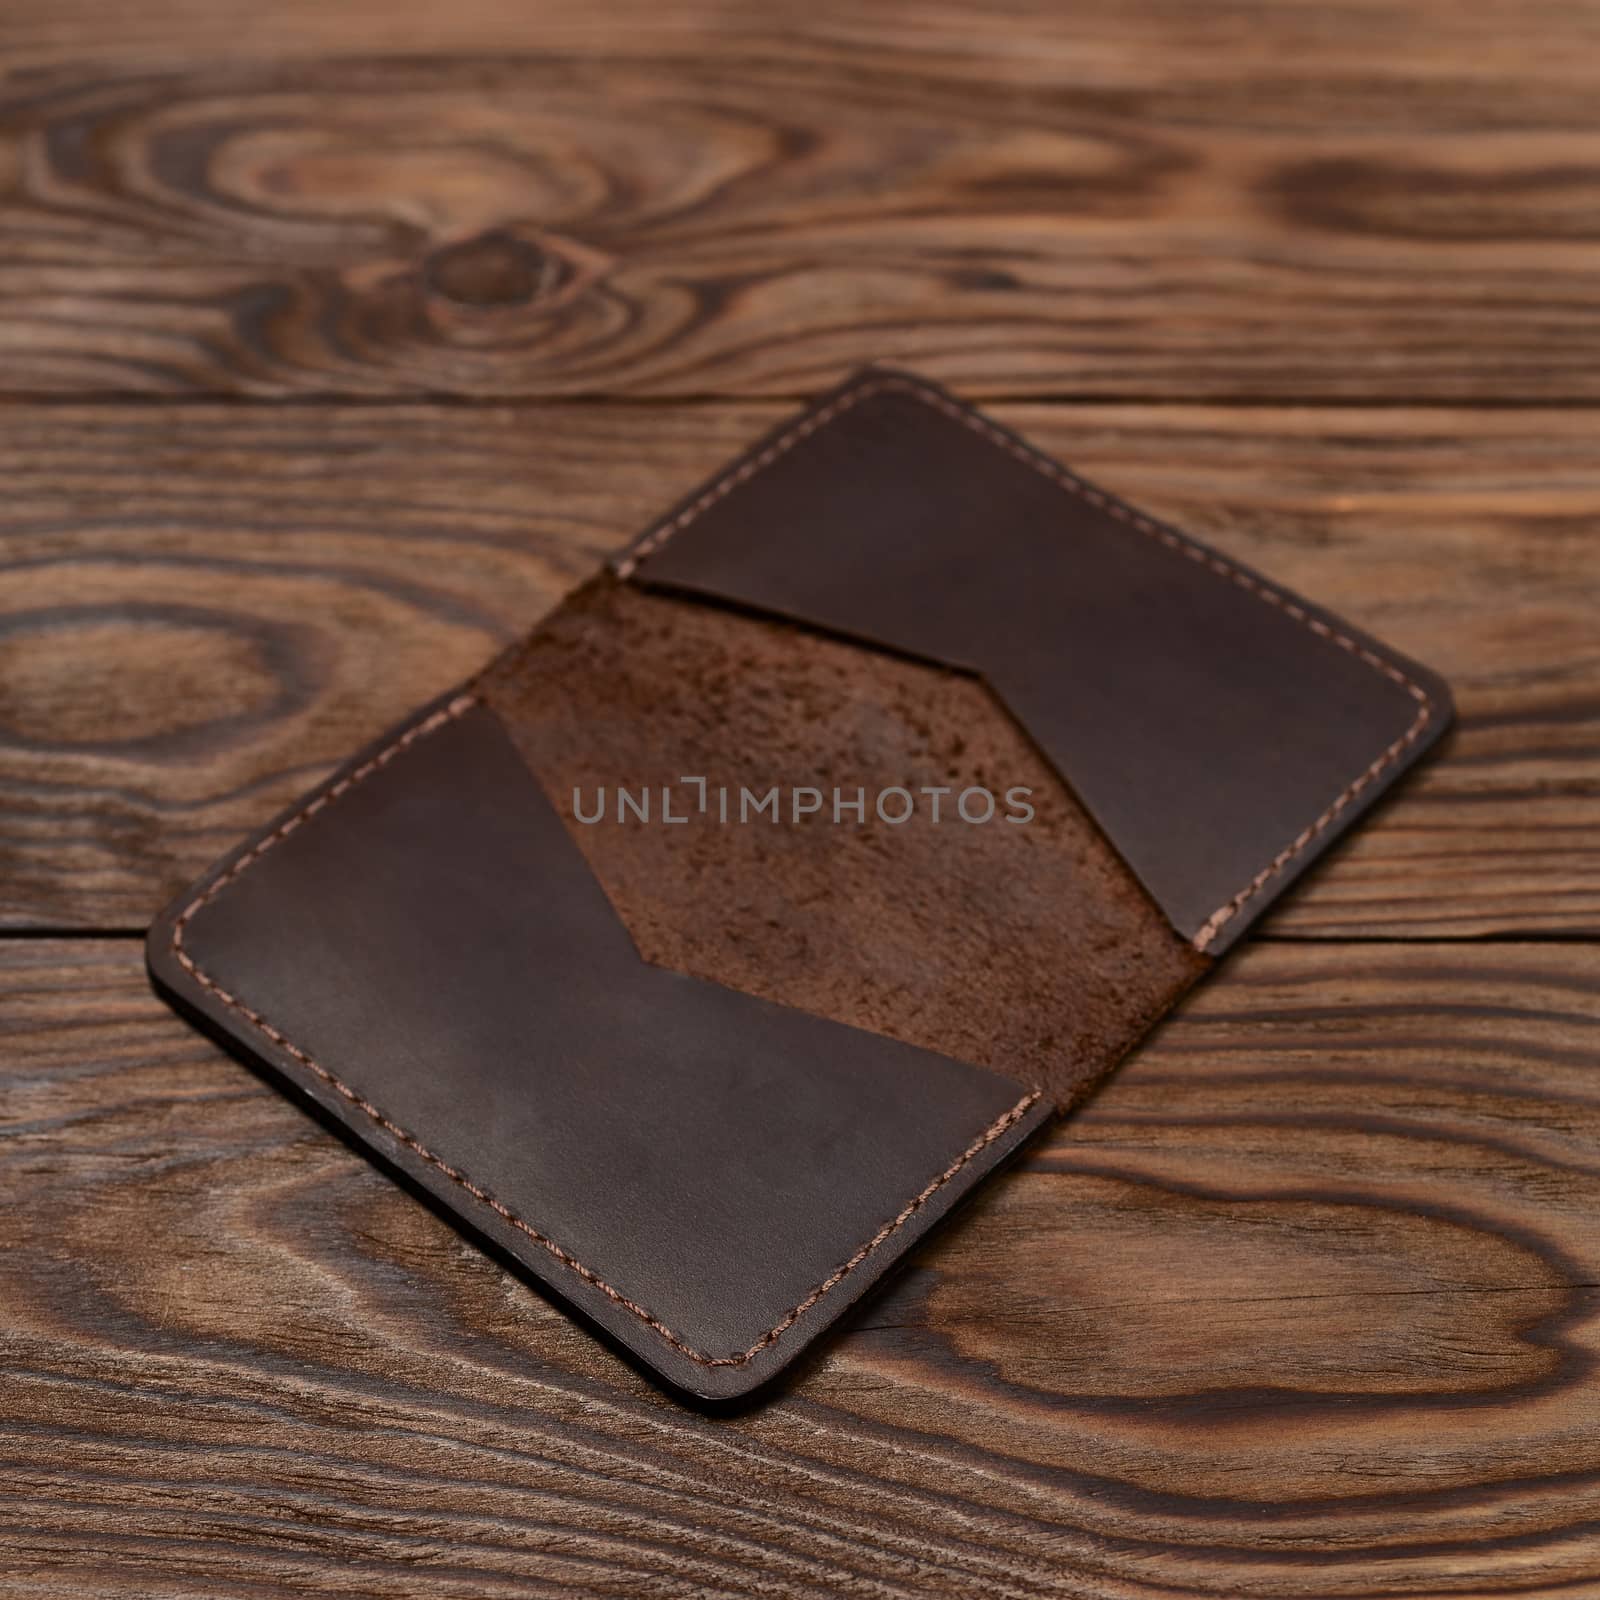 Handmade brown leather cardholder on wooden background. Stock photo with blurred background.